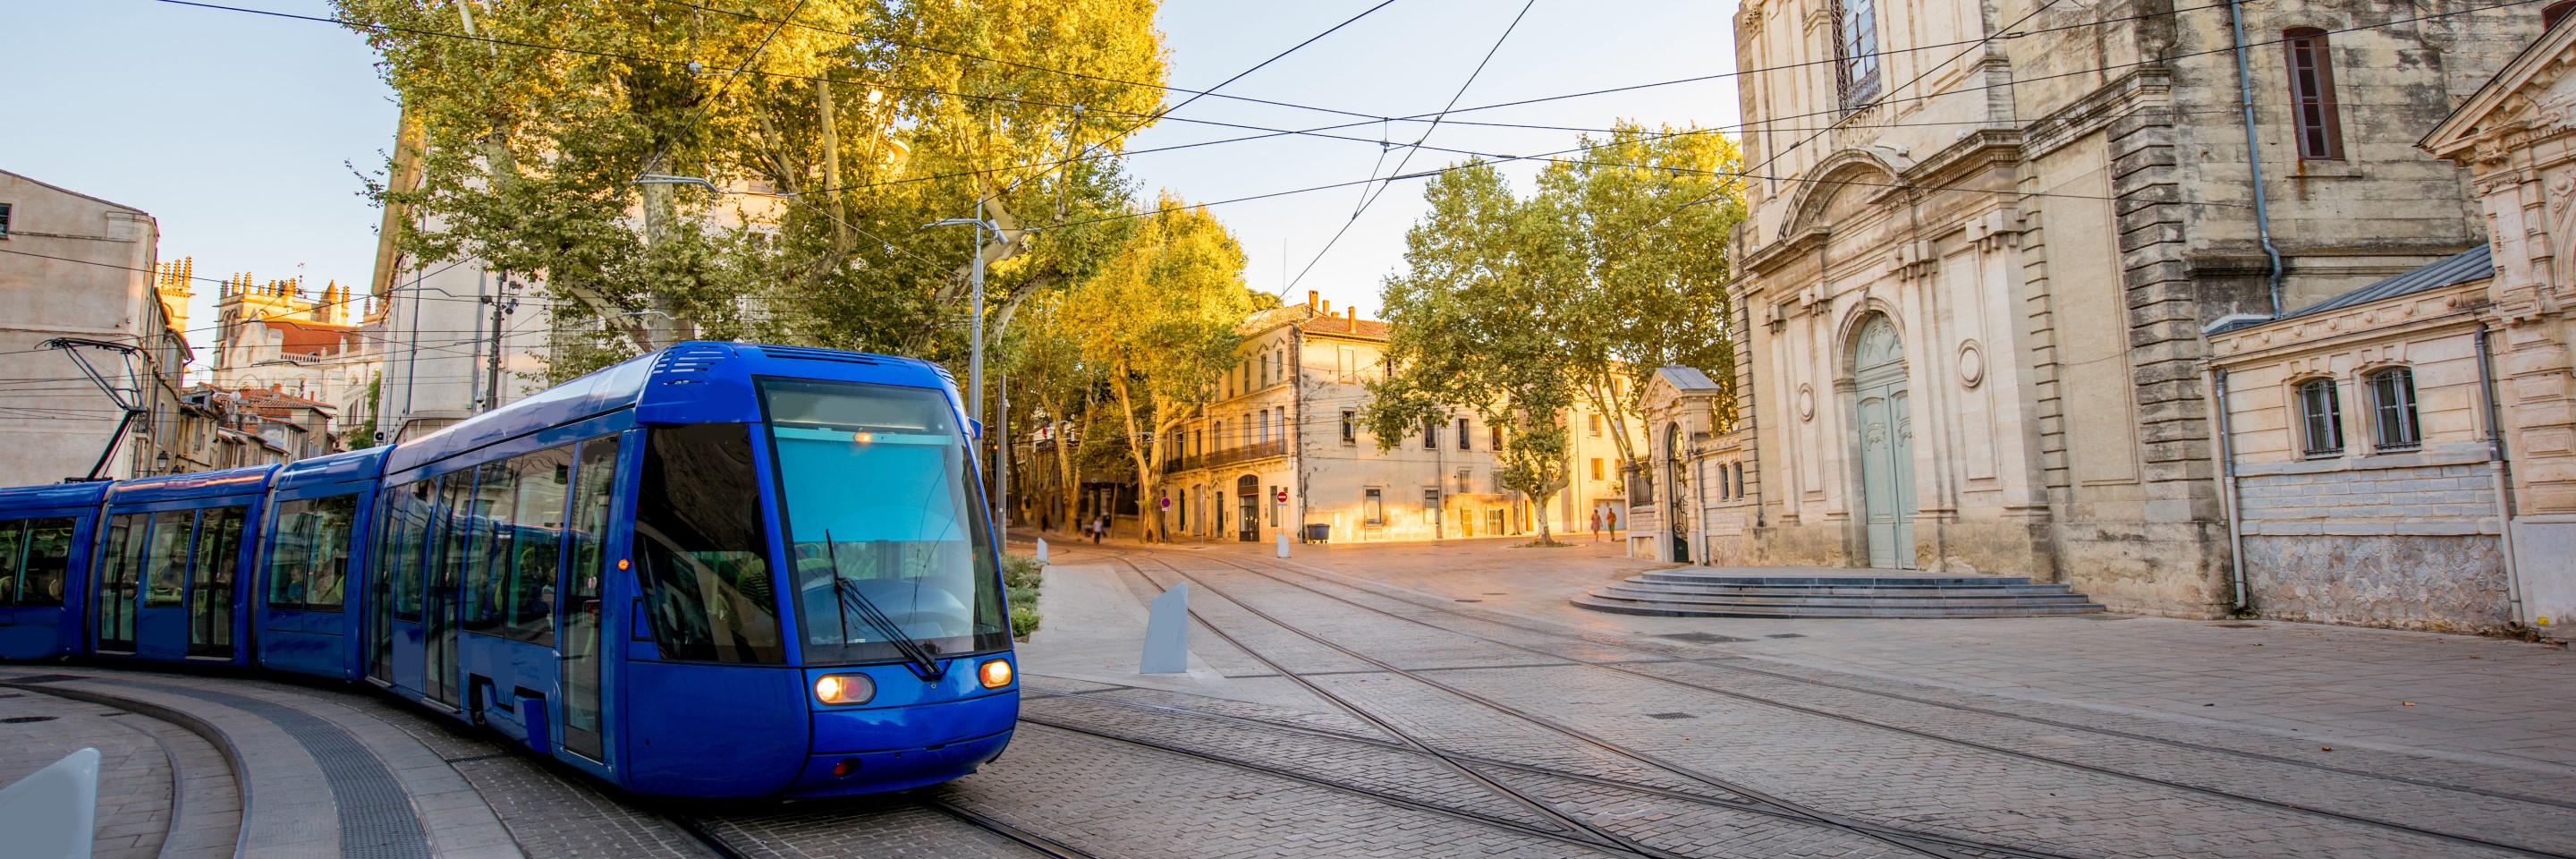 Tramway_Montpellier_mobilités